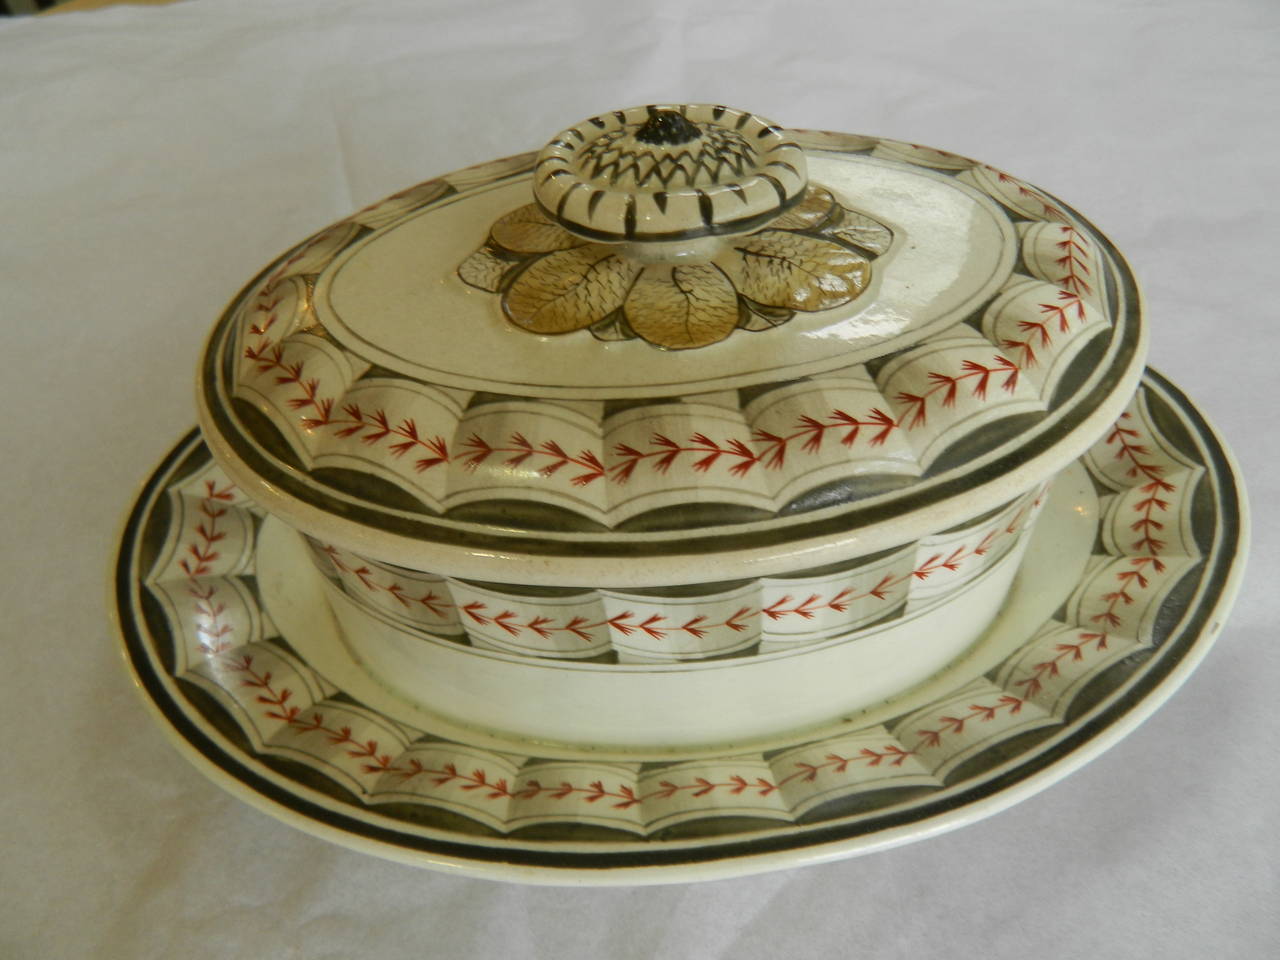 Other Group Wedgwood Creamware Lag and Feather Pattern, circa 1800